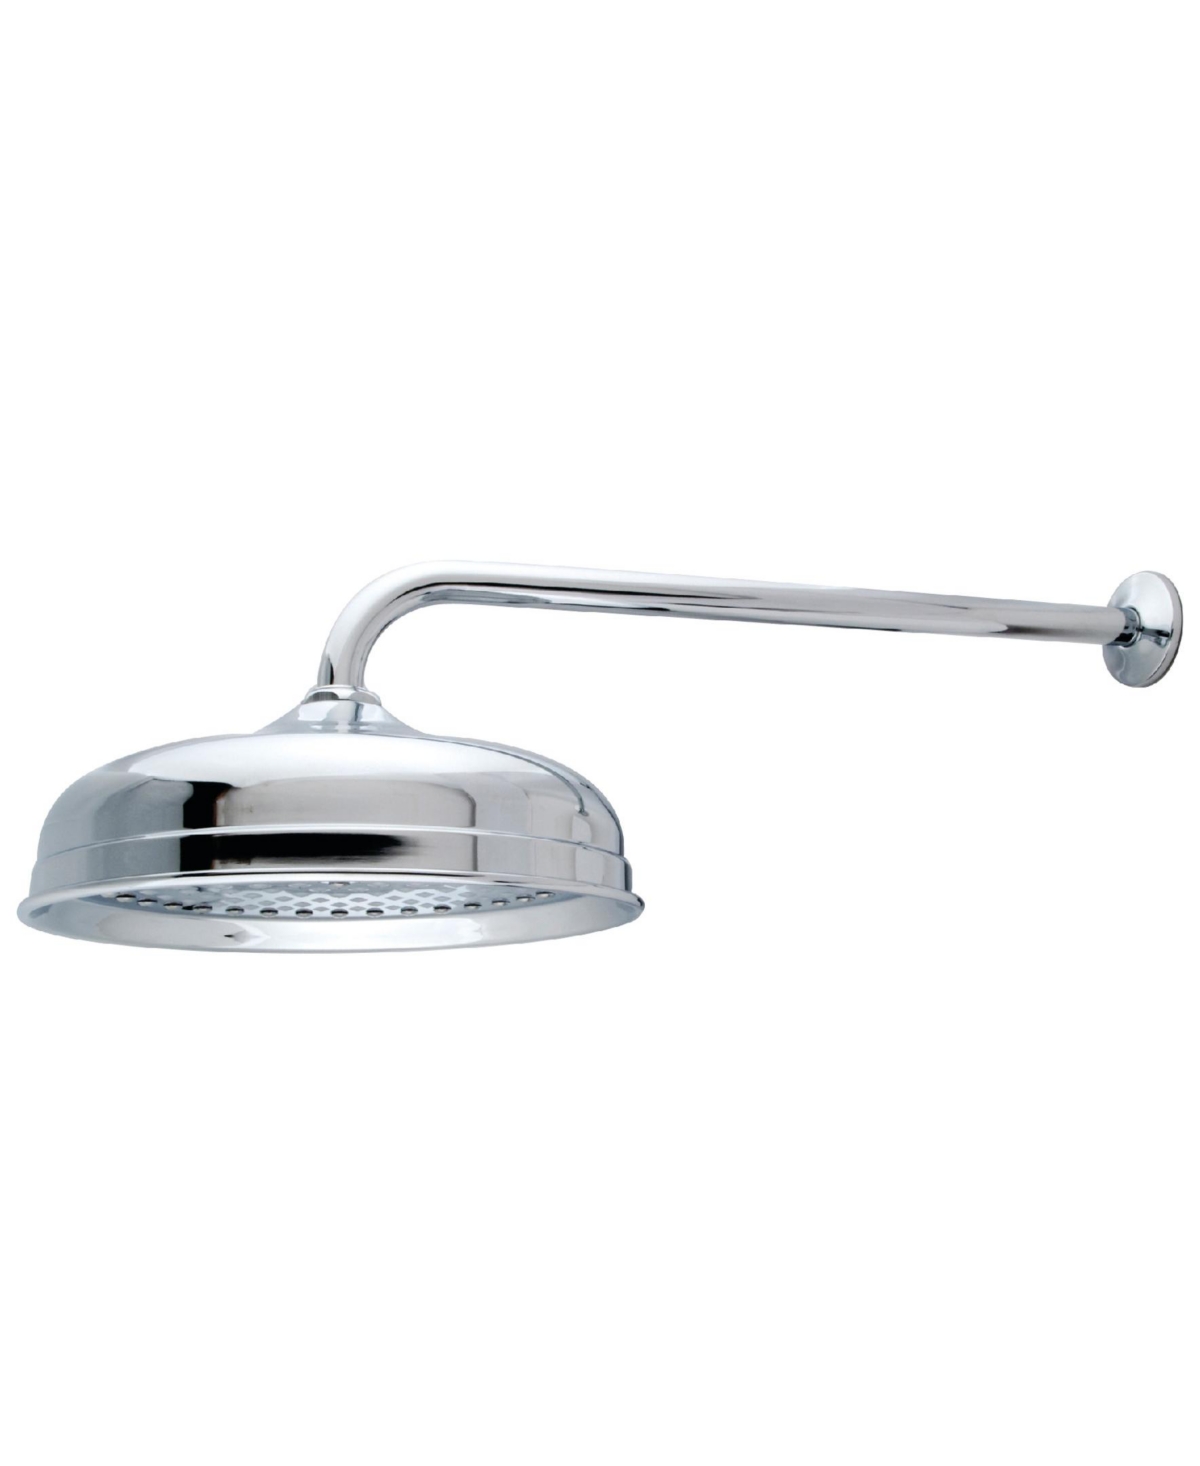 Kingston Brass Trimscape 10-Inch Shower Head with 17-Inch Shower Arm in Polished Chrome Bedding